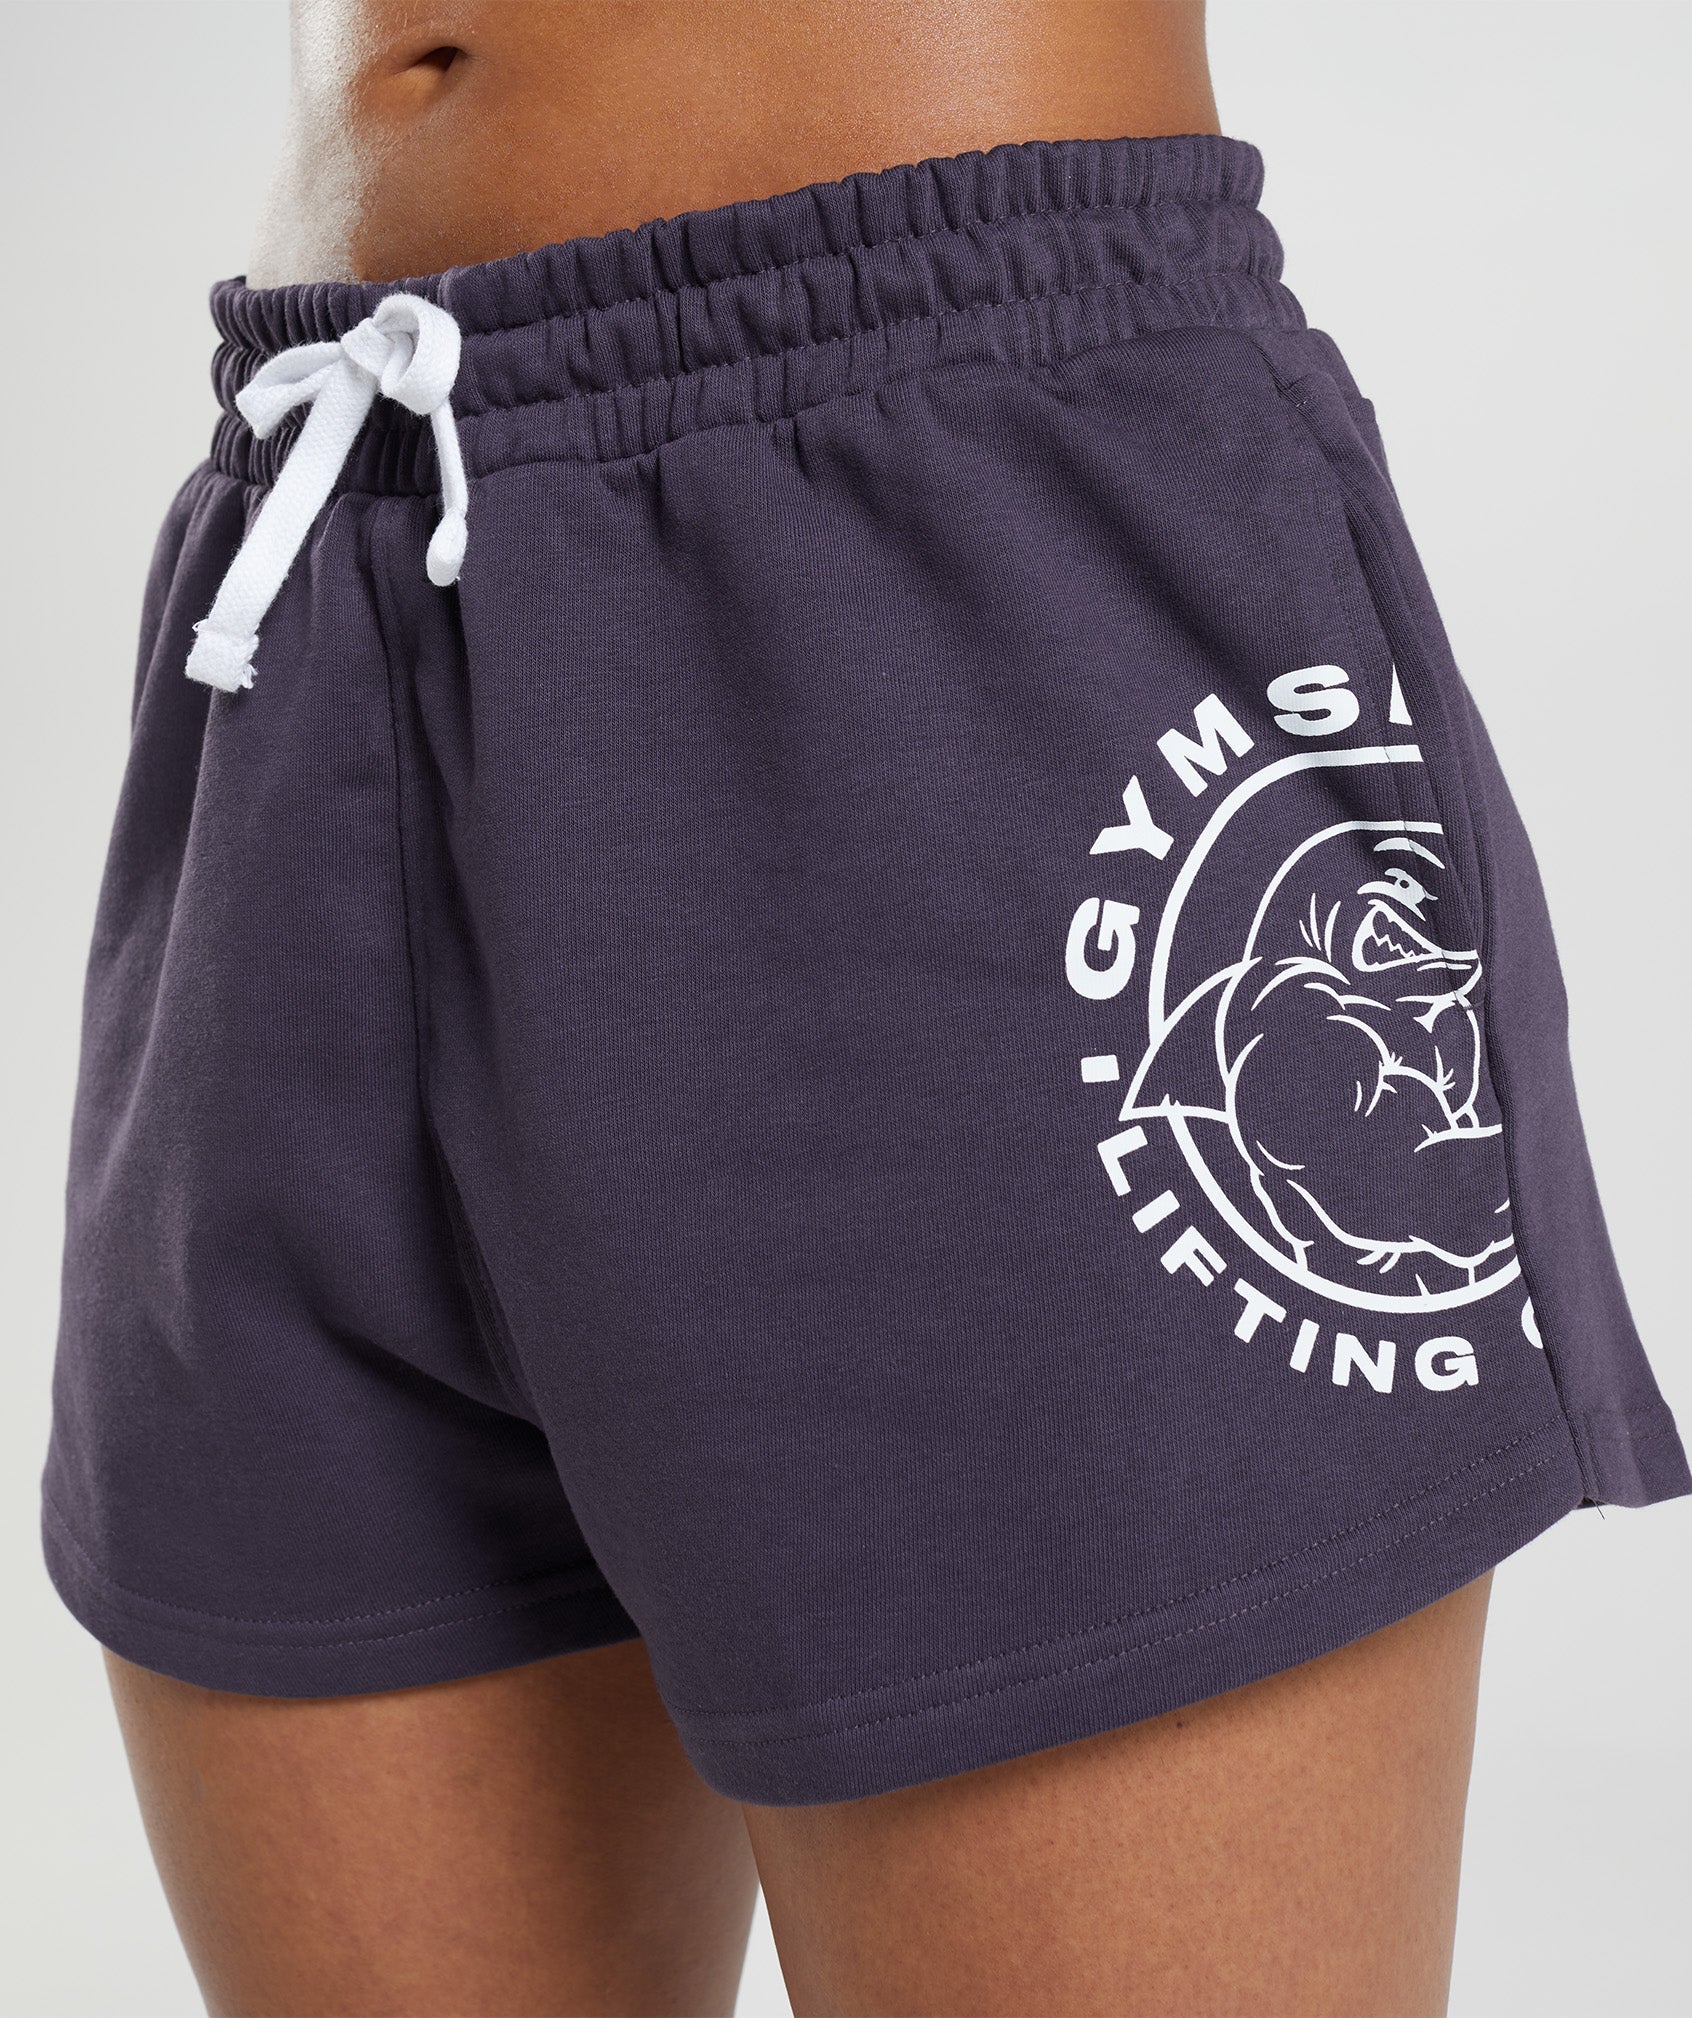 Legacy Shorts in Rich Purple - view 3